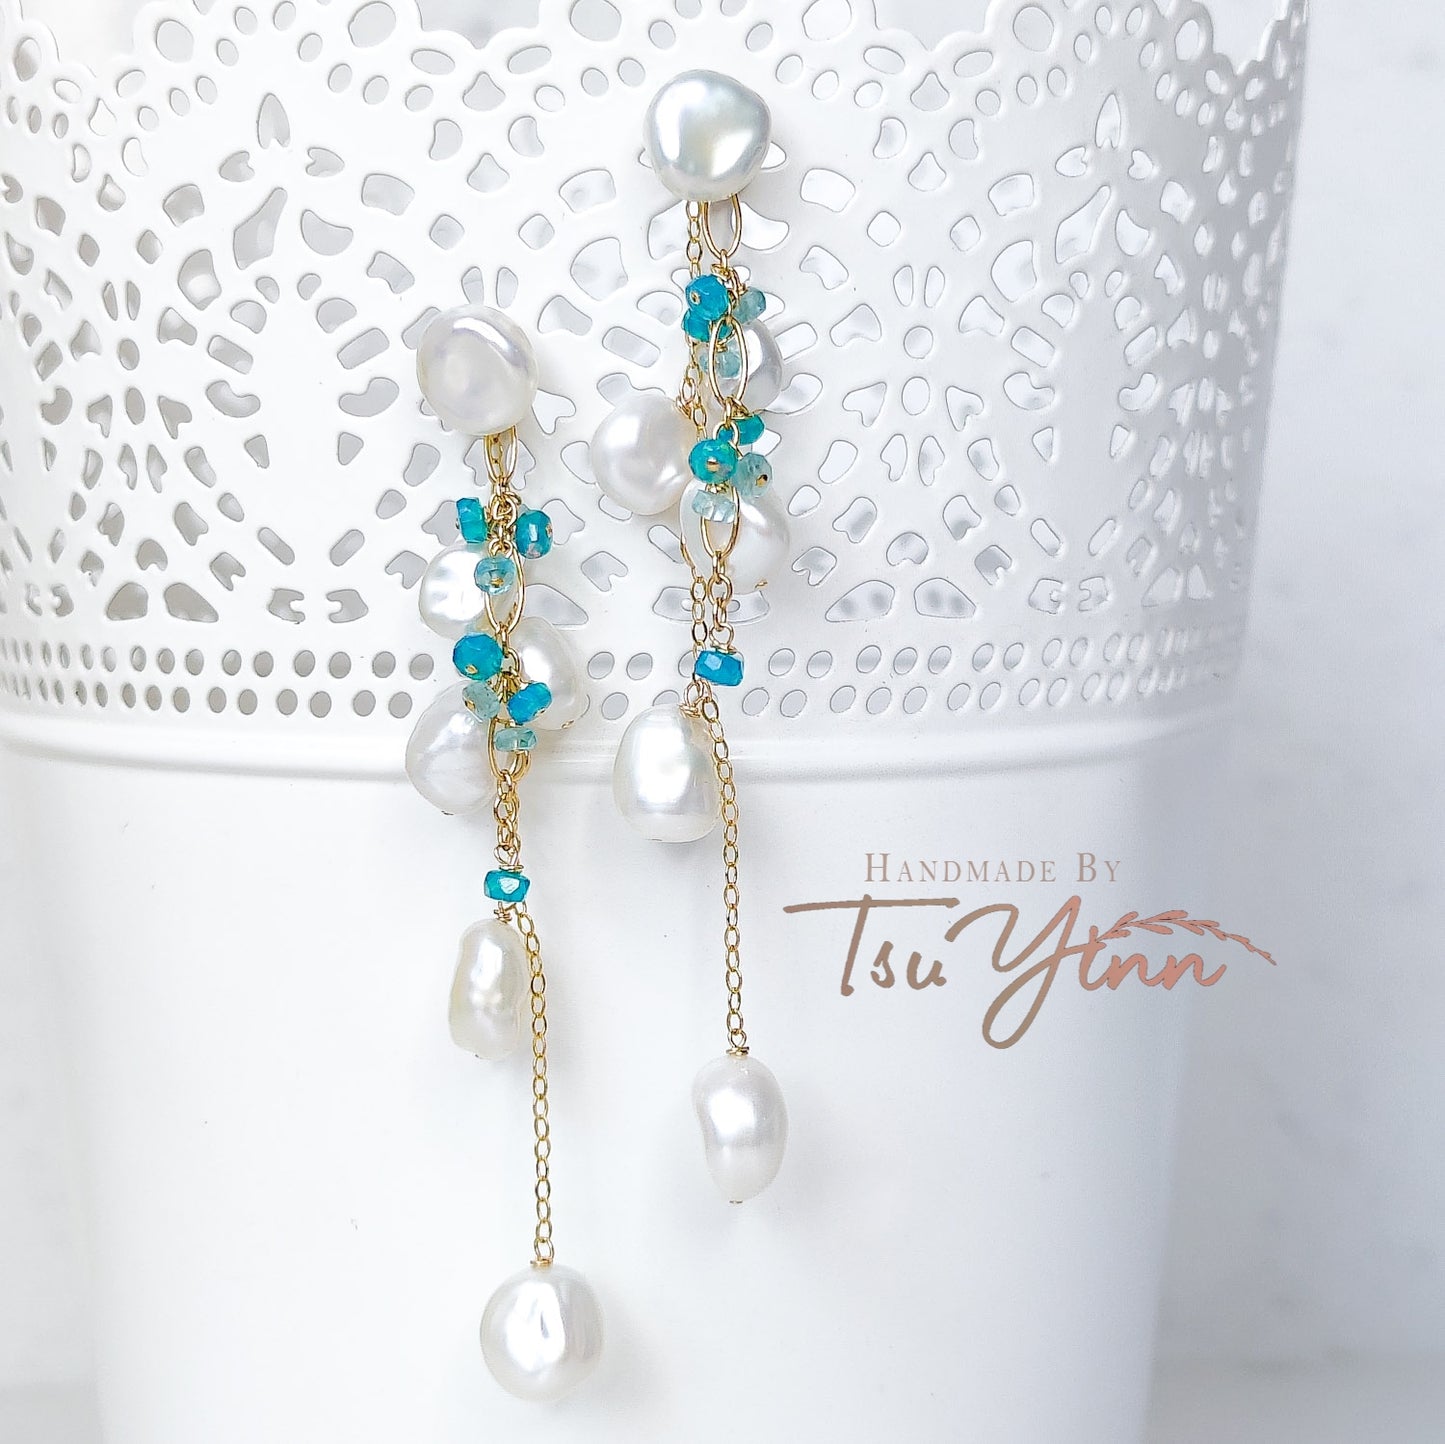 Multiwear Keshi Pearl Baubles Earrings with Blue Fire Opal and Aquamarine in YG